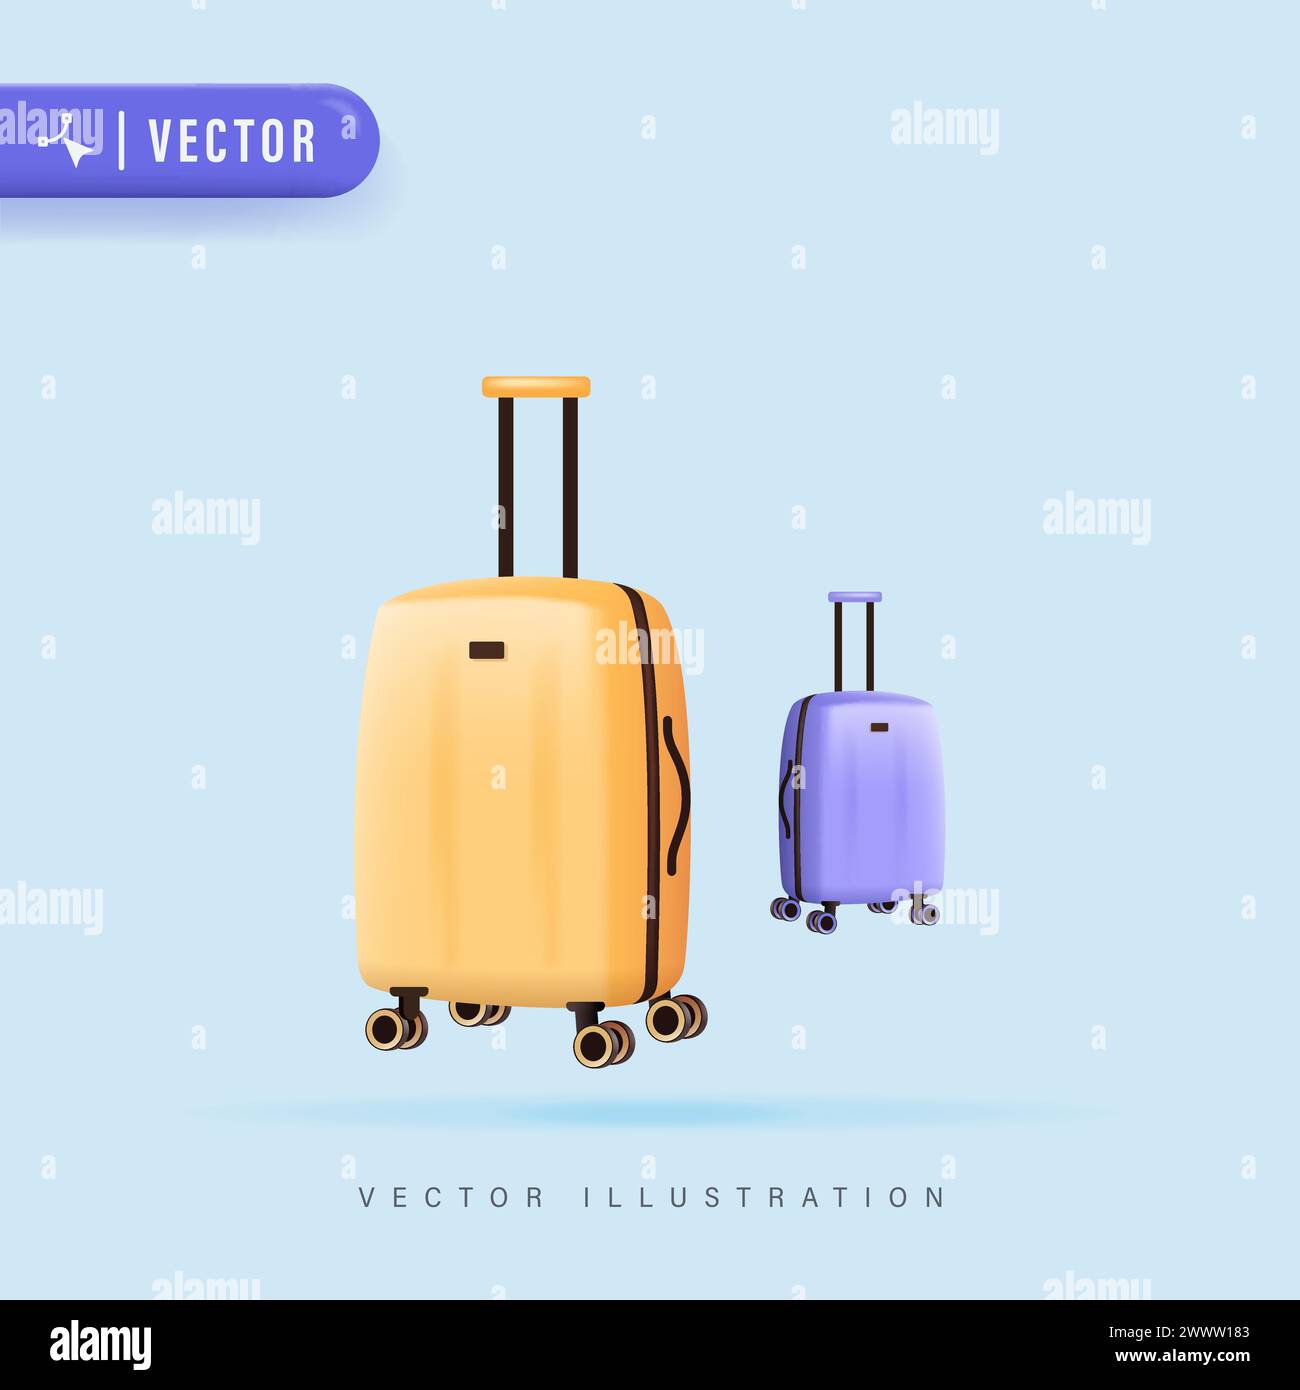 3D Realistic Cartoon Colored Suitcases on Wheels Vector Illustration. Travel suitcases, business cases, travel luggage. Yellow and Purple plastic suit Stock Vector